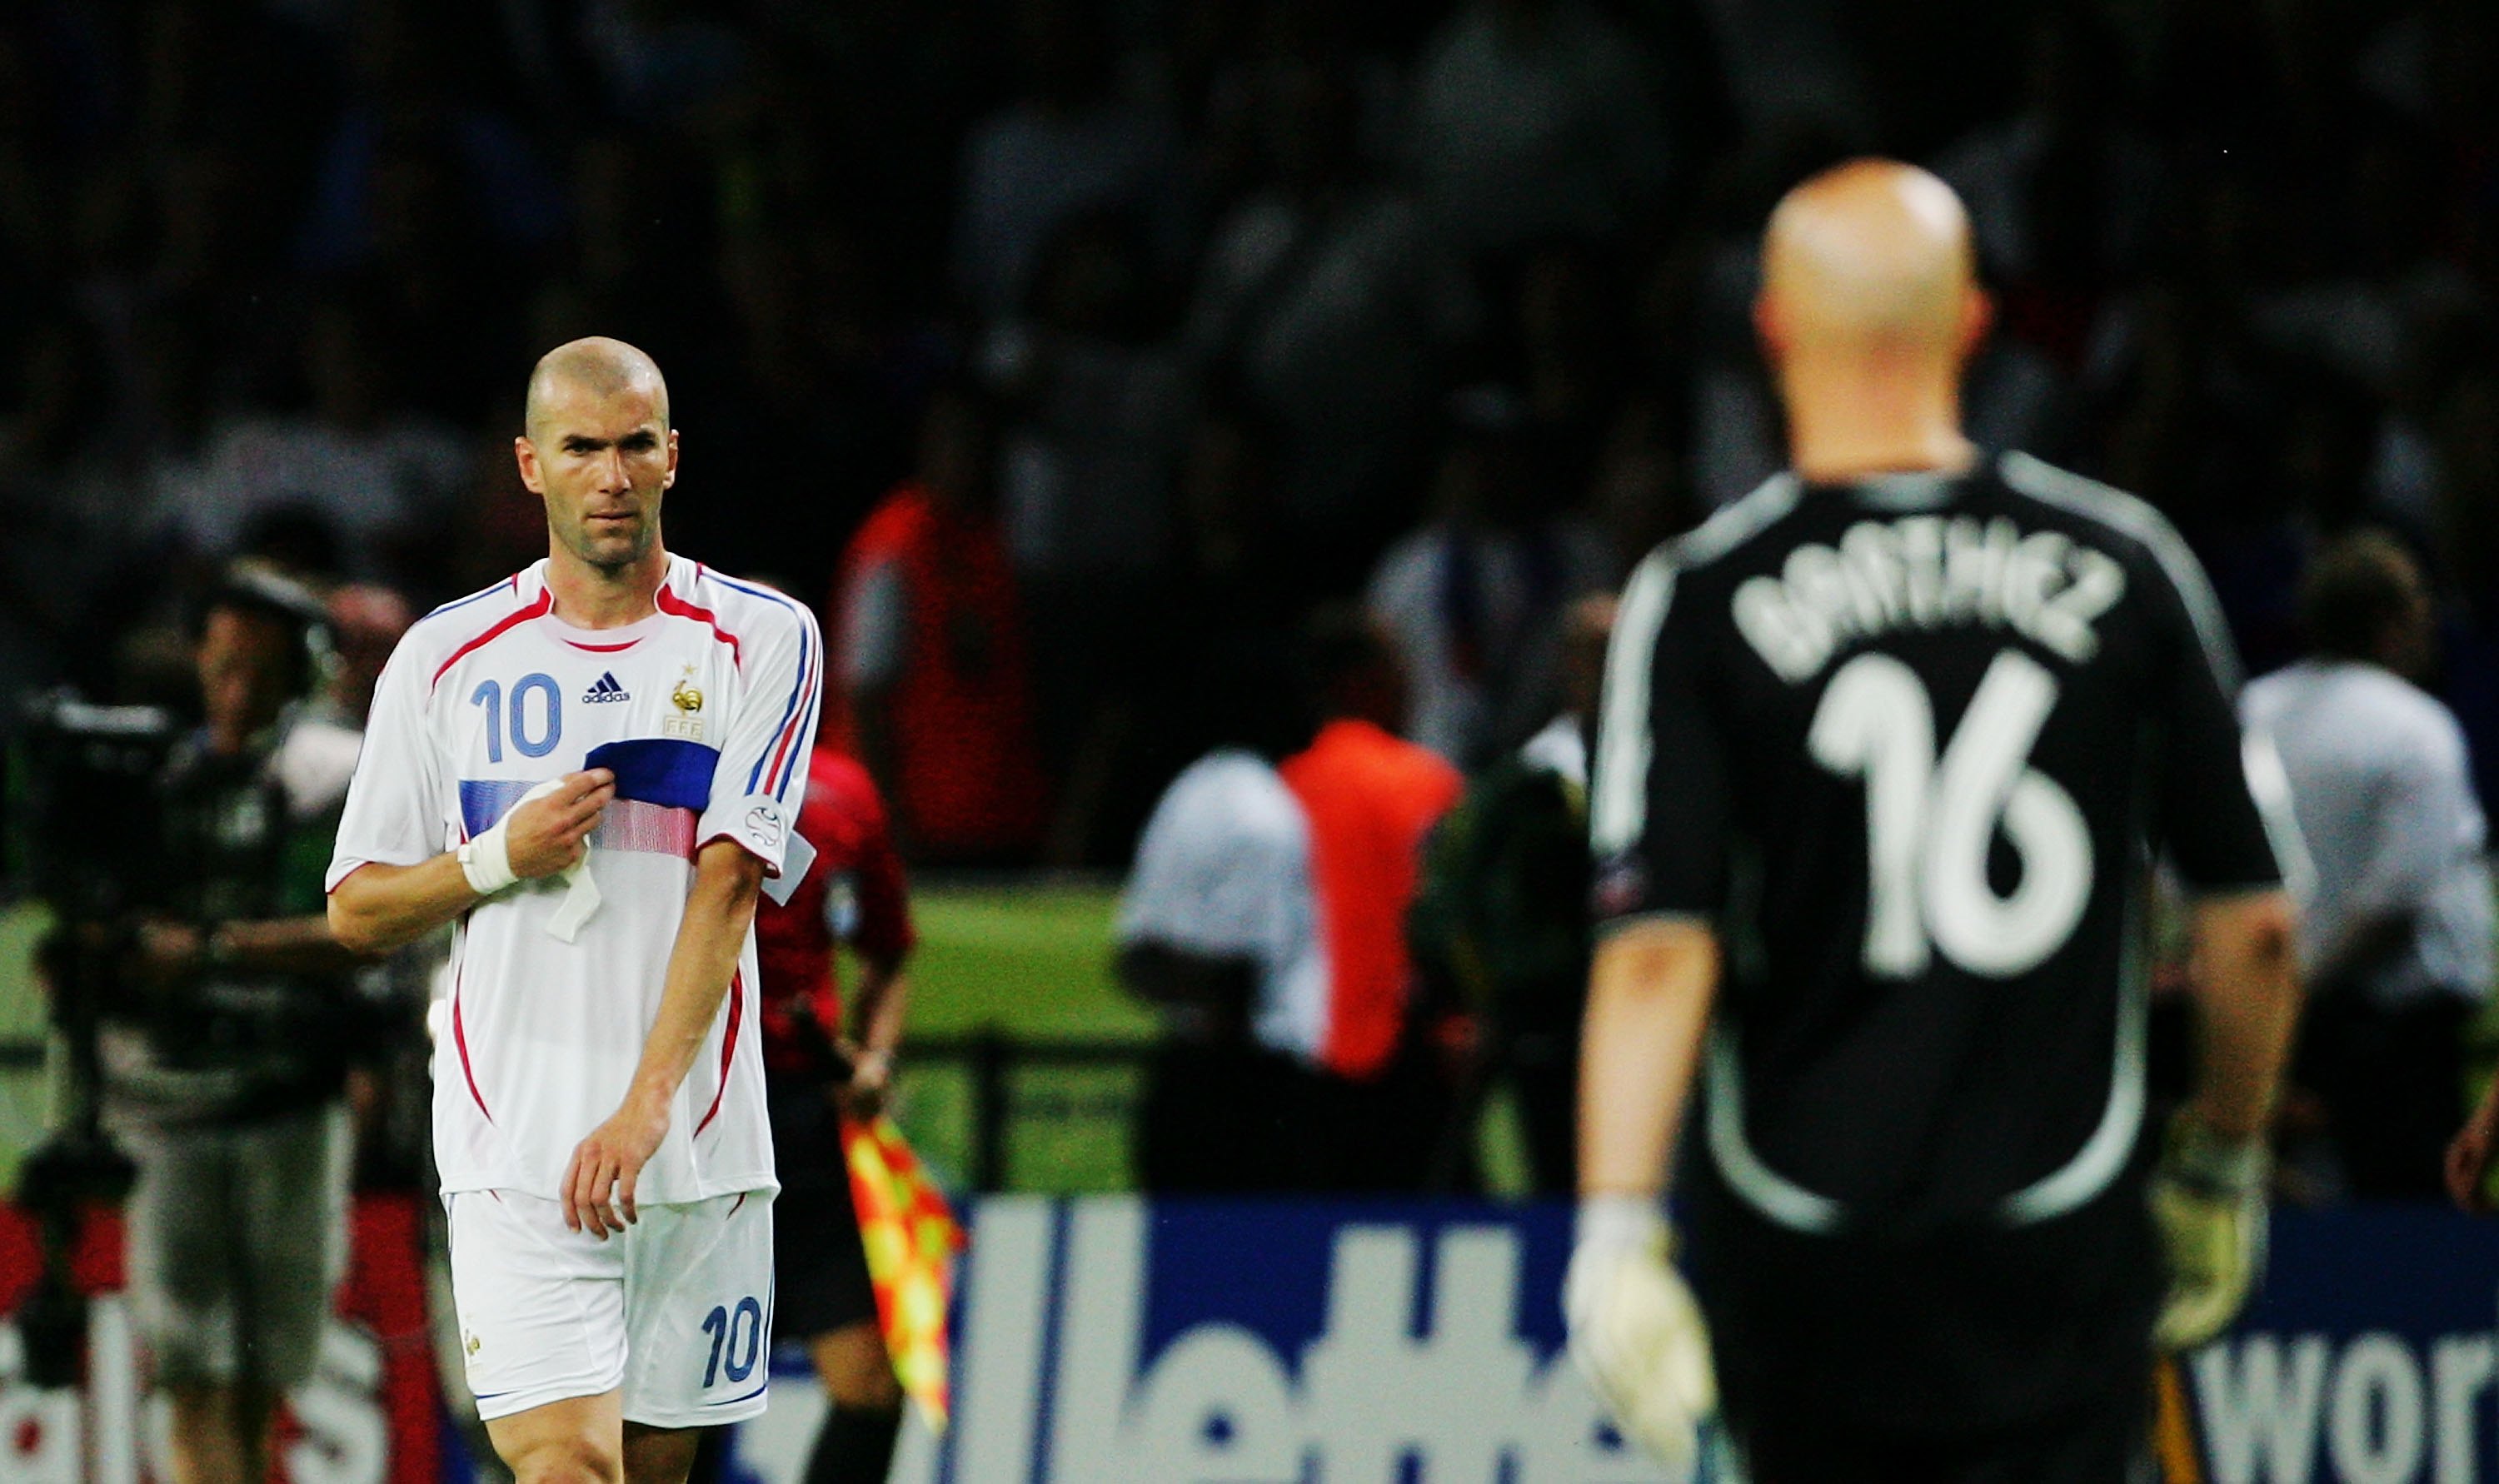 BERLIN - JULY 09:  Zinedine Zidane of France removes his captain's armband to pass to Fabien Barthez after being sent off during the FIFA World Cup Germany 2006 Final match between Italy and France at the Olympic Stadium on July 9, 2006 in Berlin, Germany